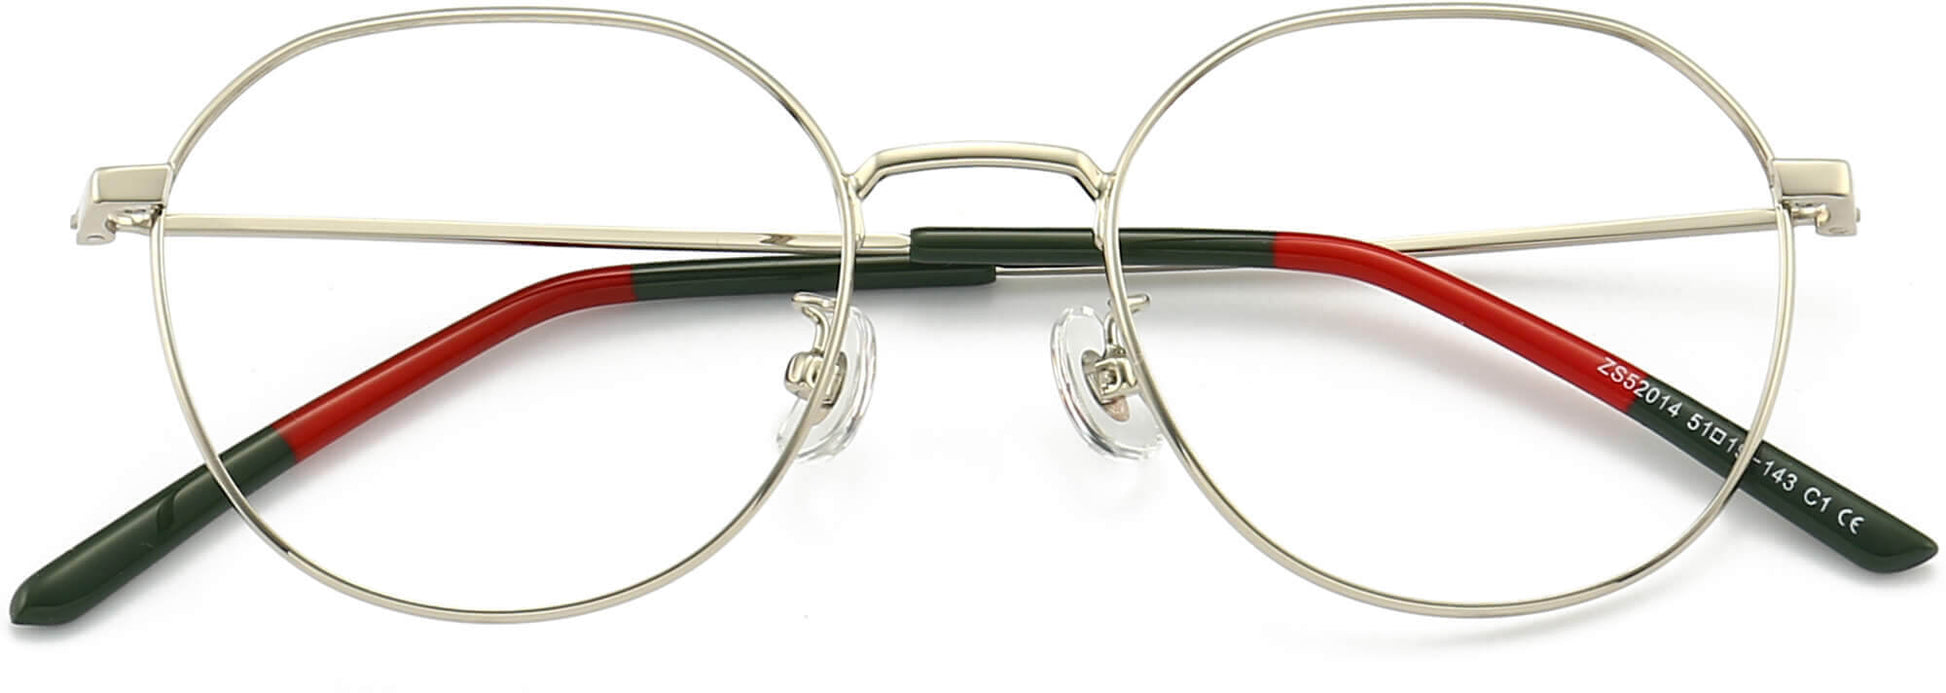 Braylen Round Silver Eyeglasses from ANRRI, closed view